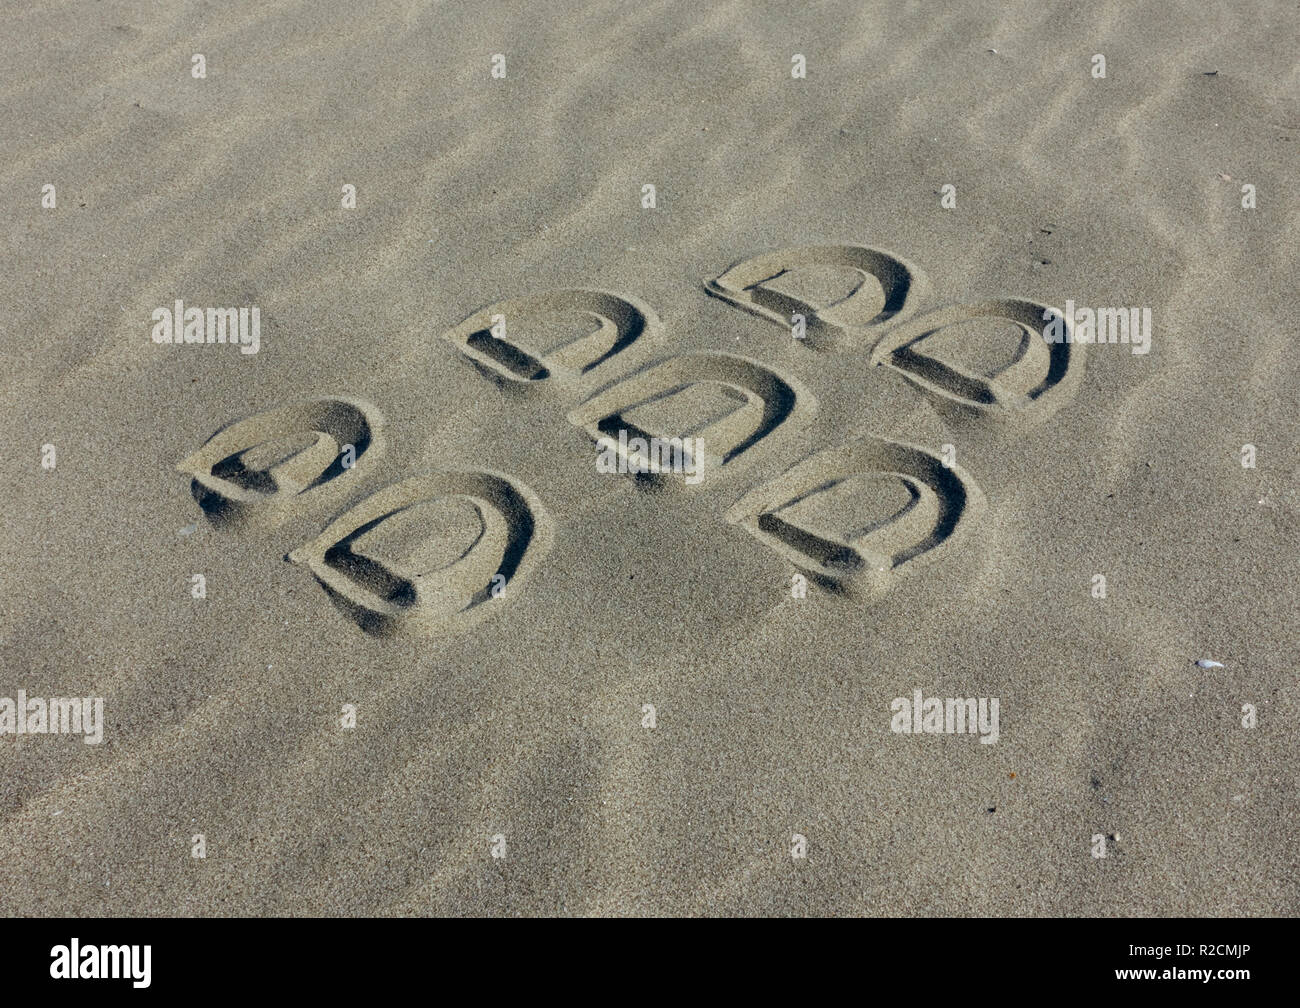 Blackberry logo brand sketched on the sand Stock Photo